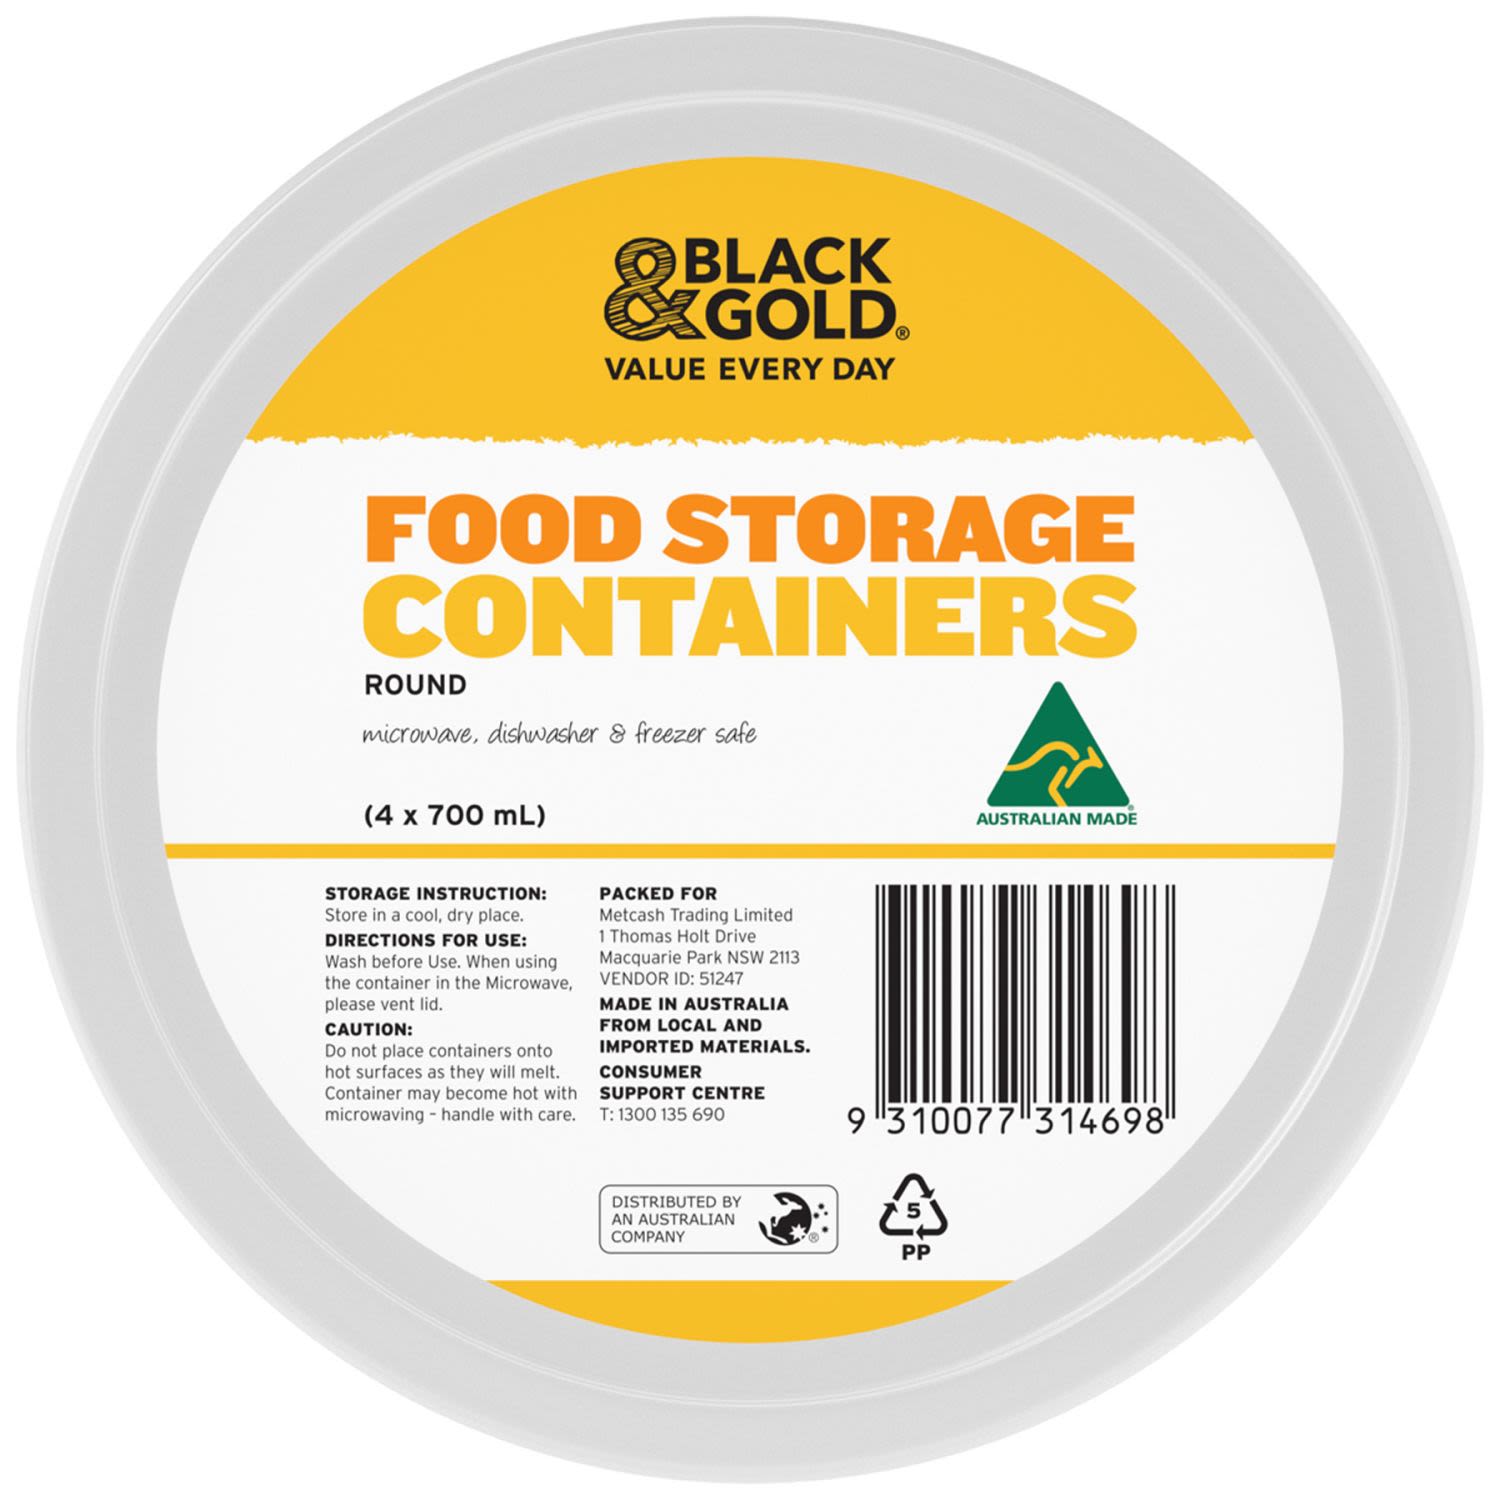 Black & Gold Food Storage Containers Round 700ml, 4 Each